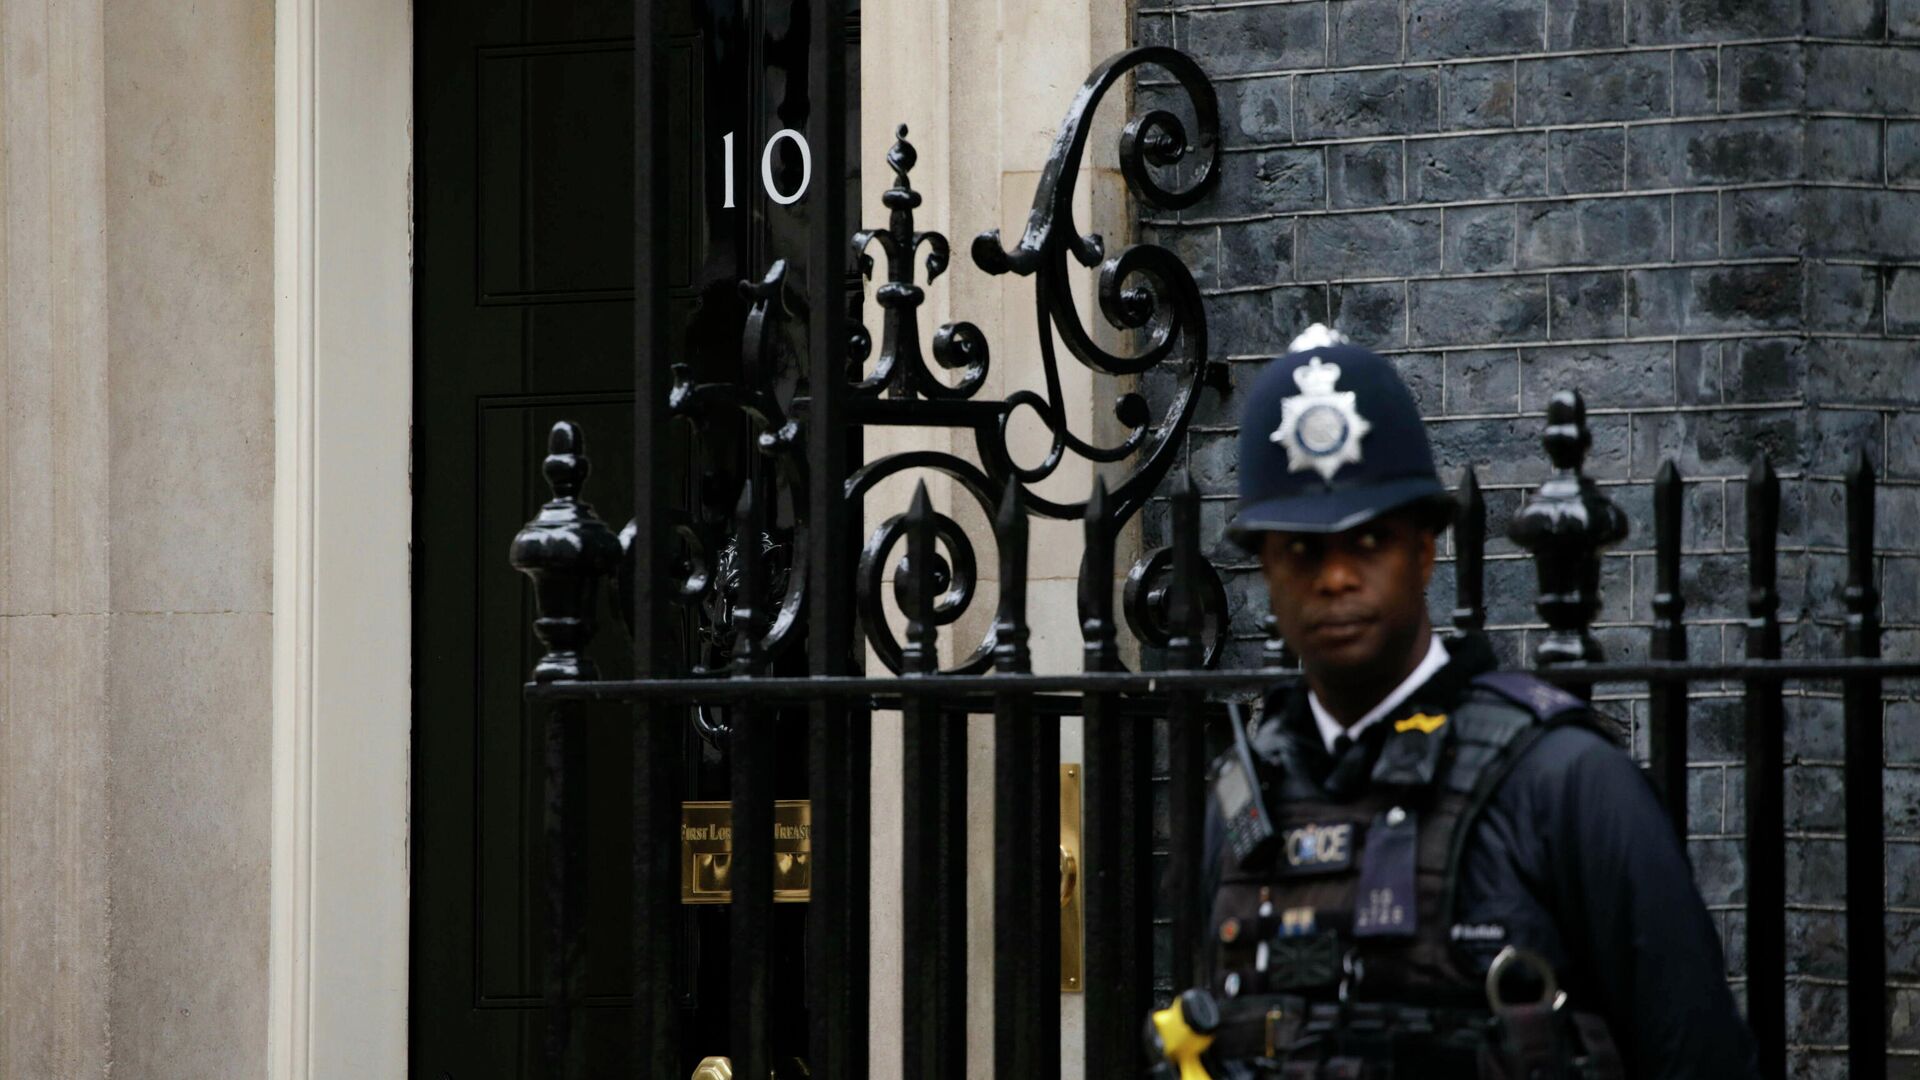 A police officer stands outside the door of 10 Downing Street in London, Tuesday, Feb. 22, 2022 - Sputnik International, 1920, 01.04.2022